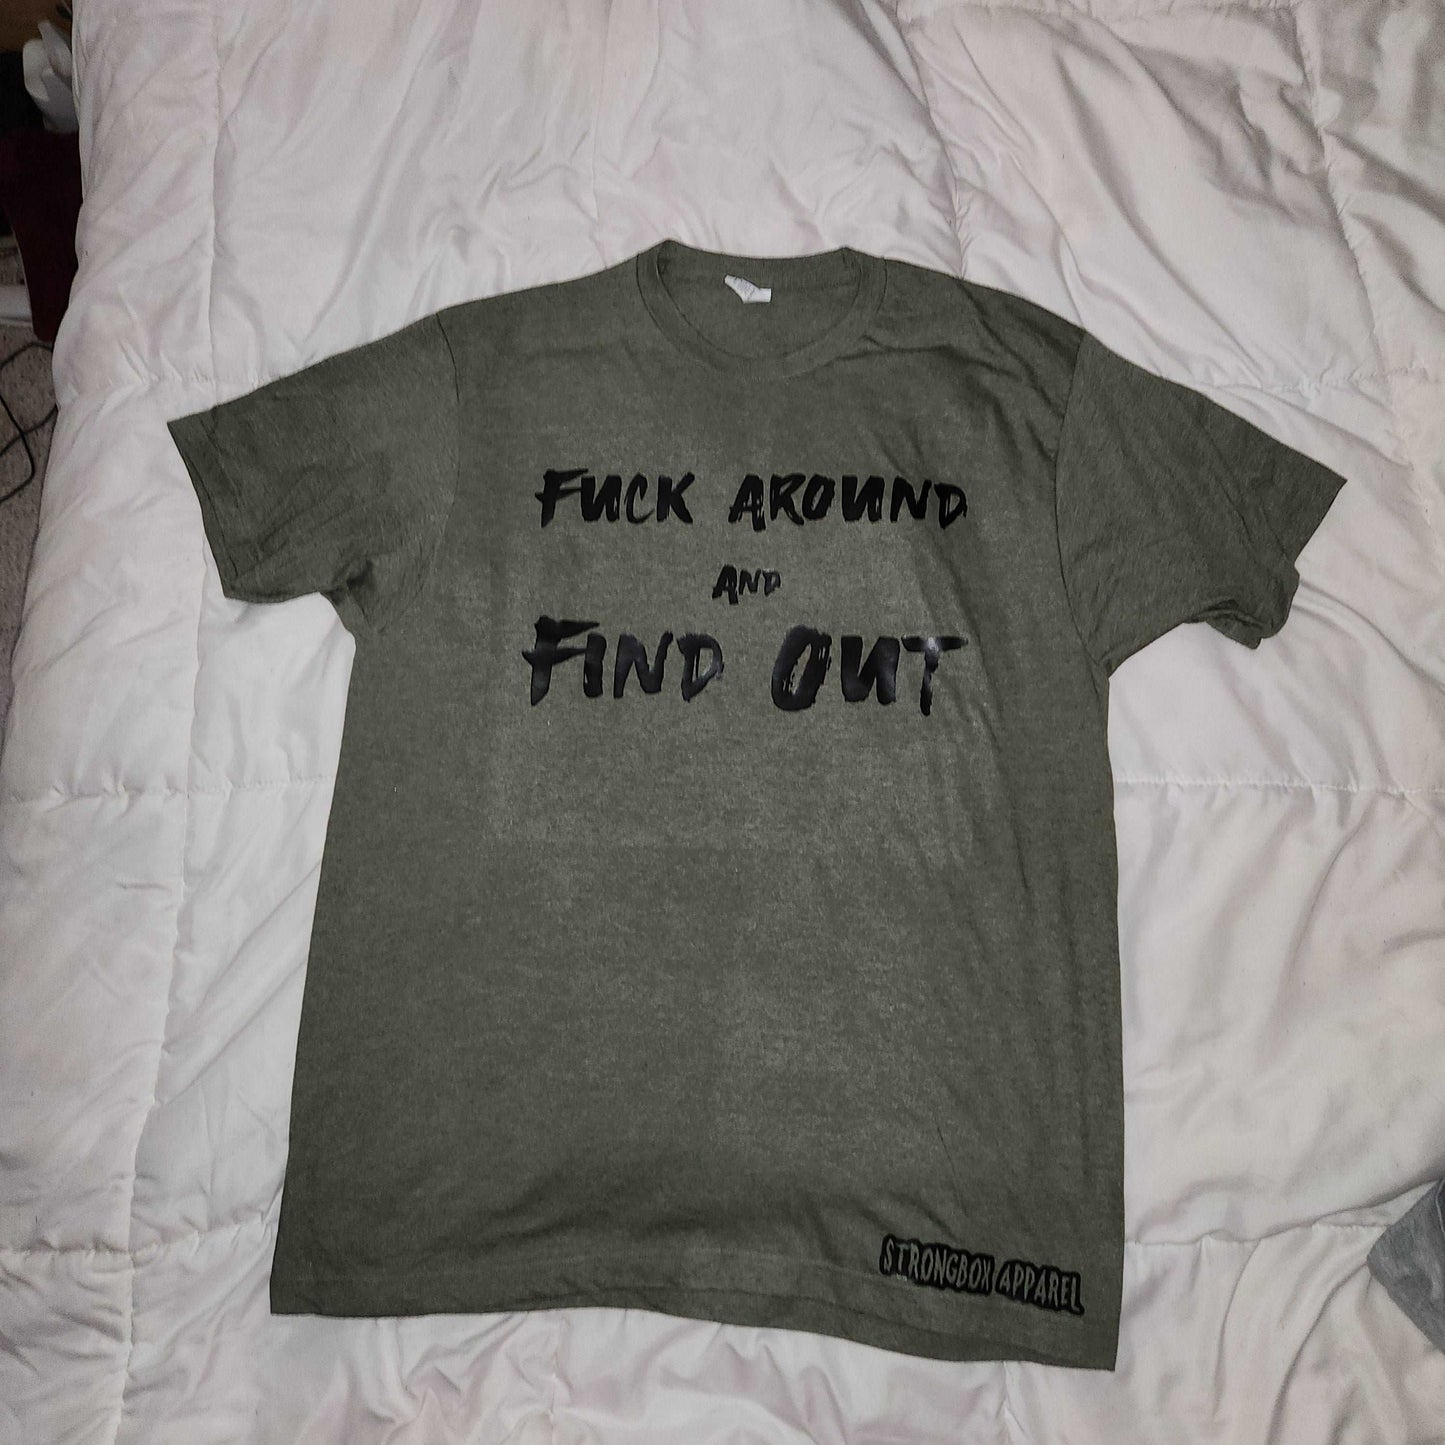 Strongbox Apparel's Fuck Around and Find Out Tee